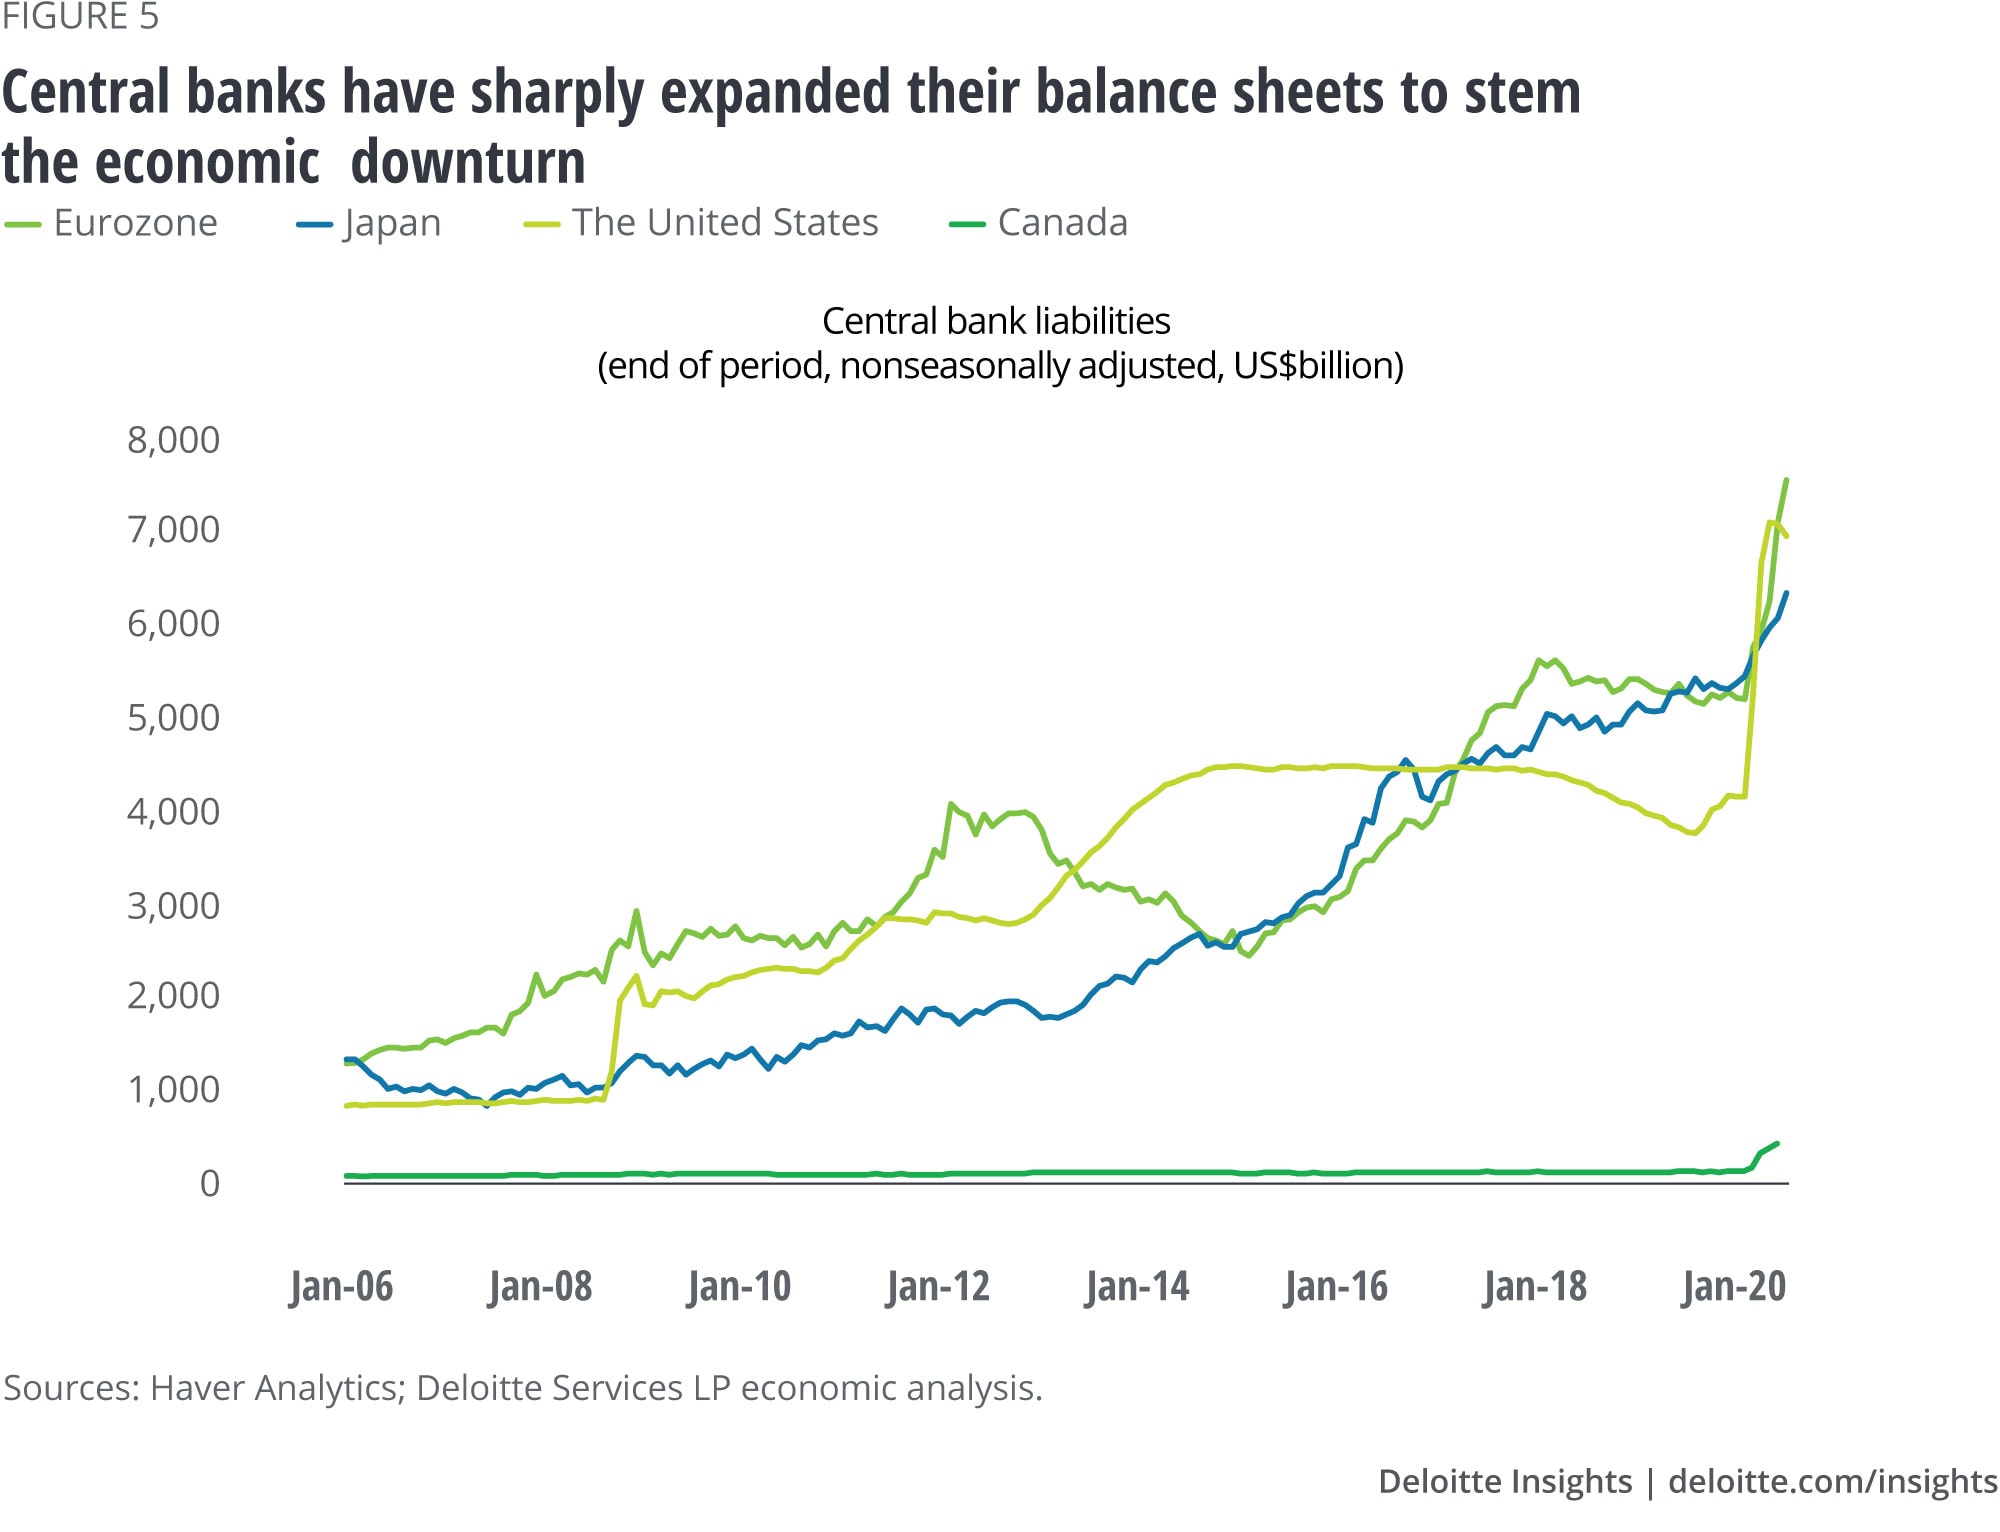 Central banks have sharply expanded their balance sheets to stem the economic downturn